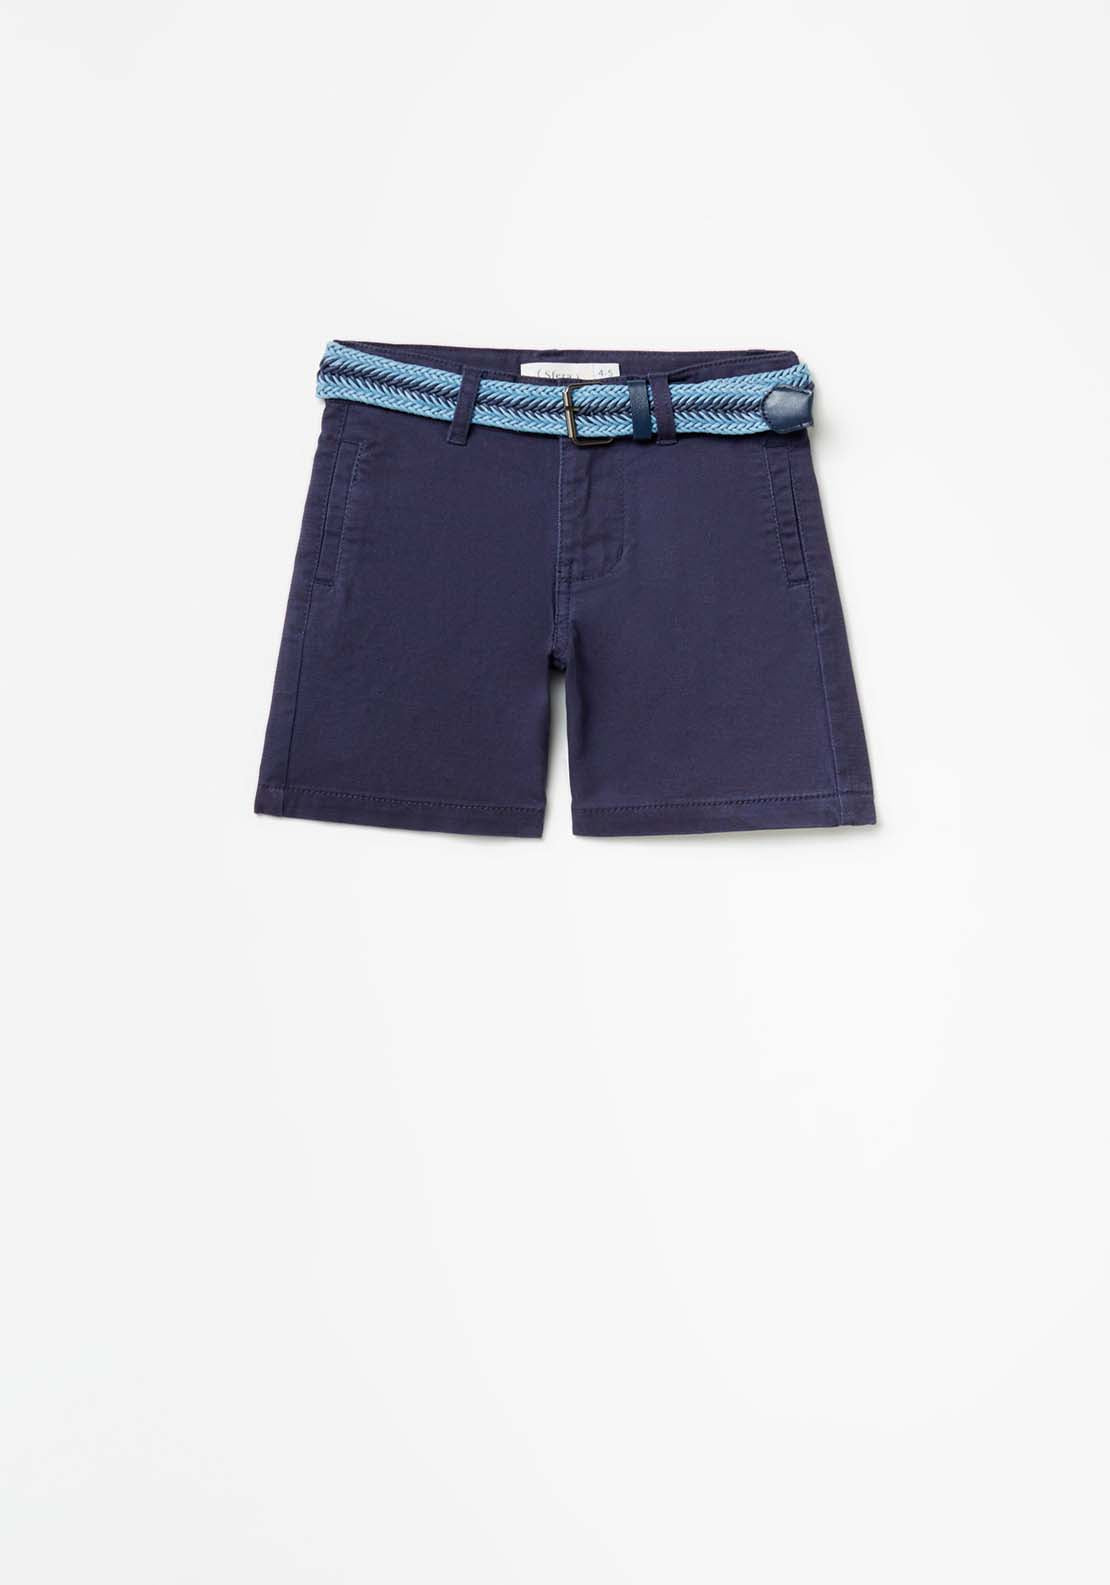 Sfera Formal Shorts With Belt - Navy / Blue 2 Shaws Department Stores